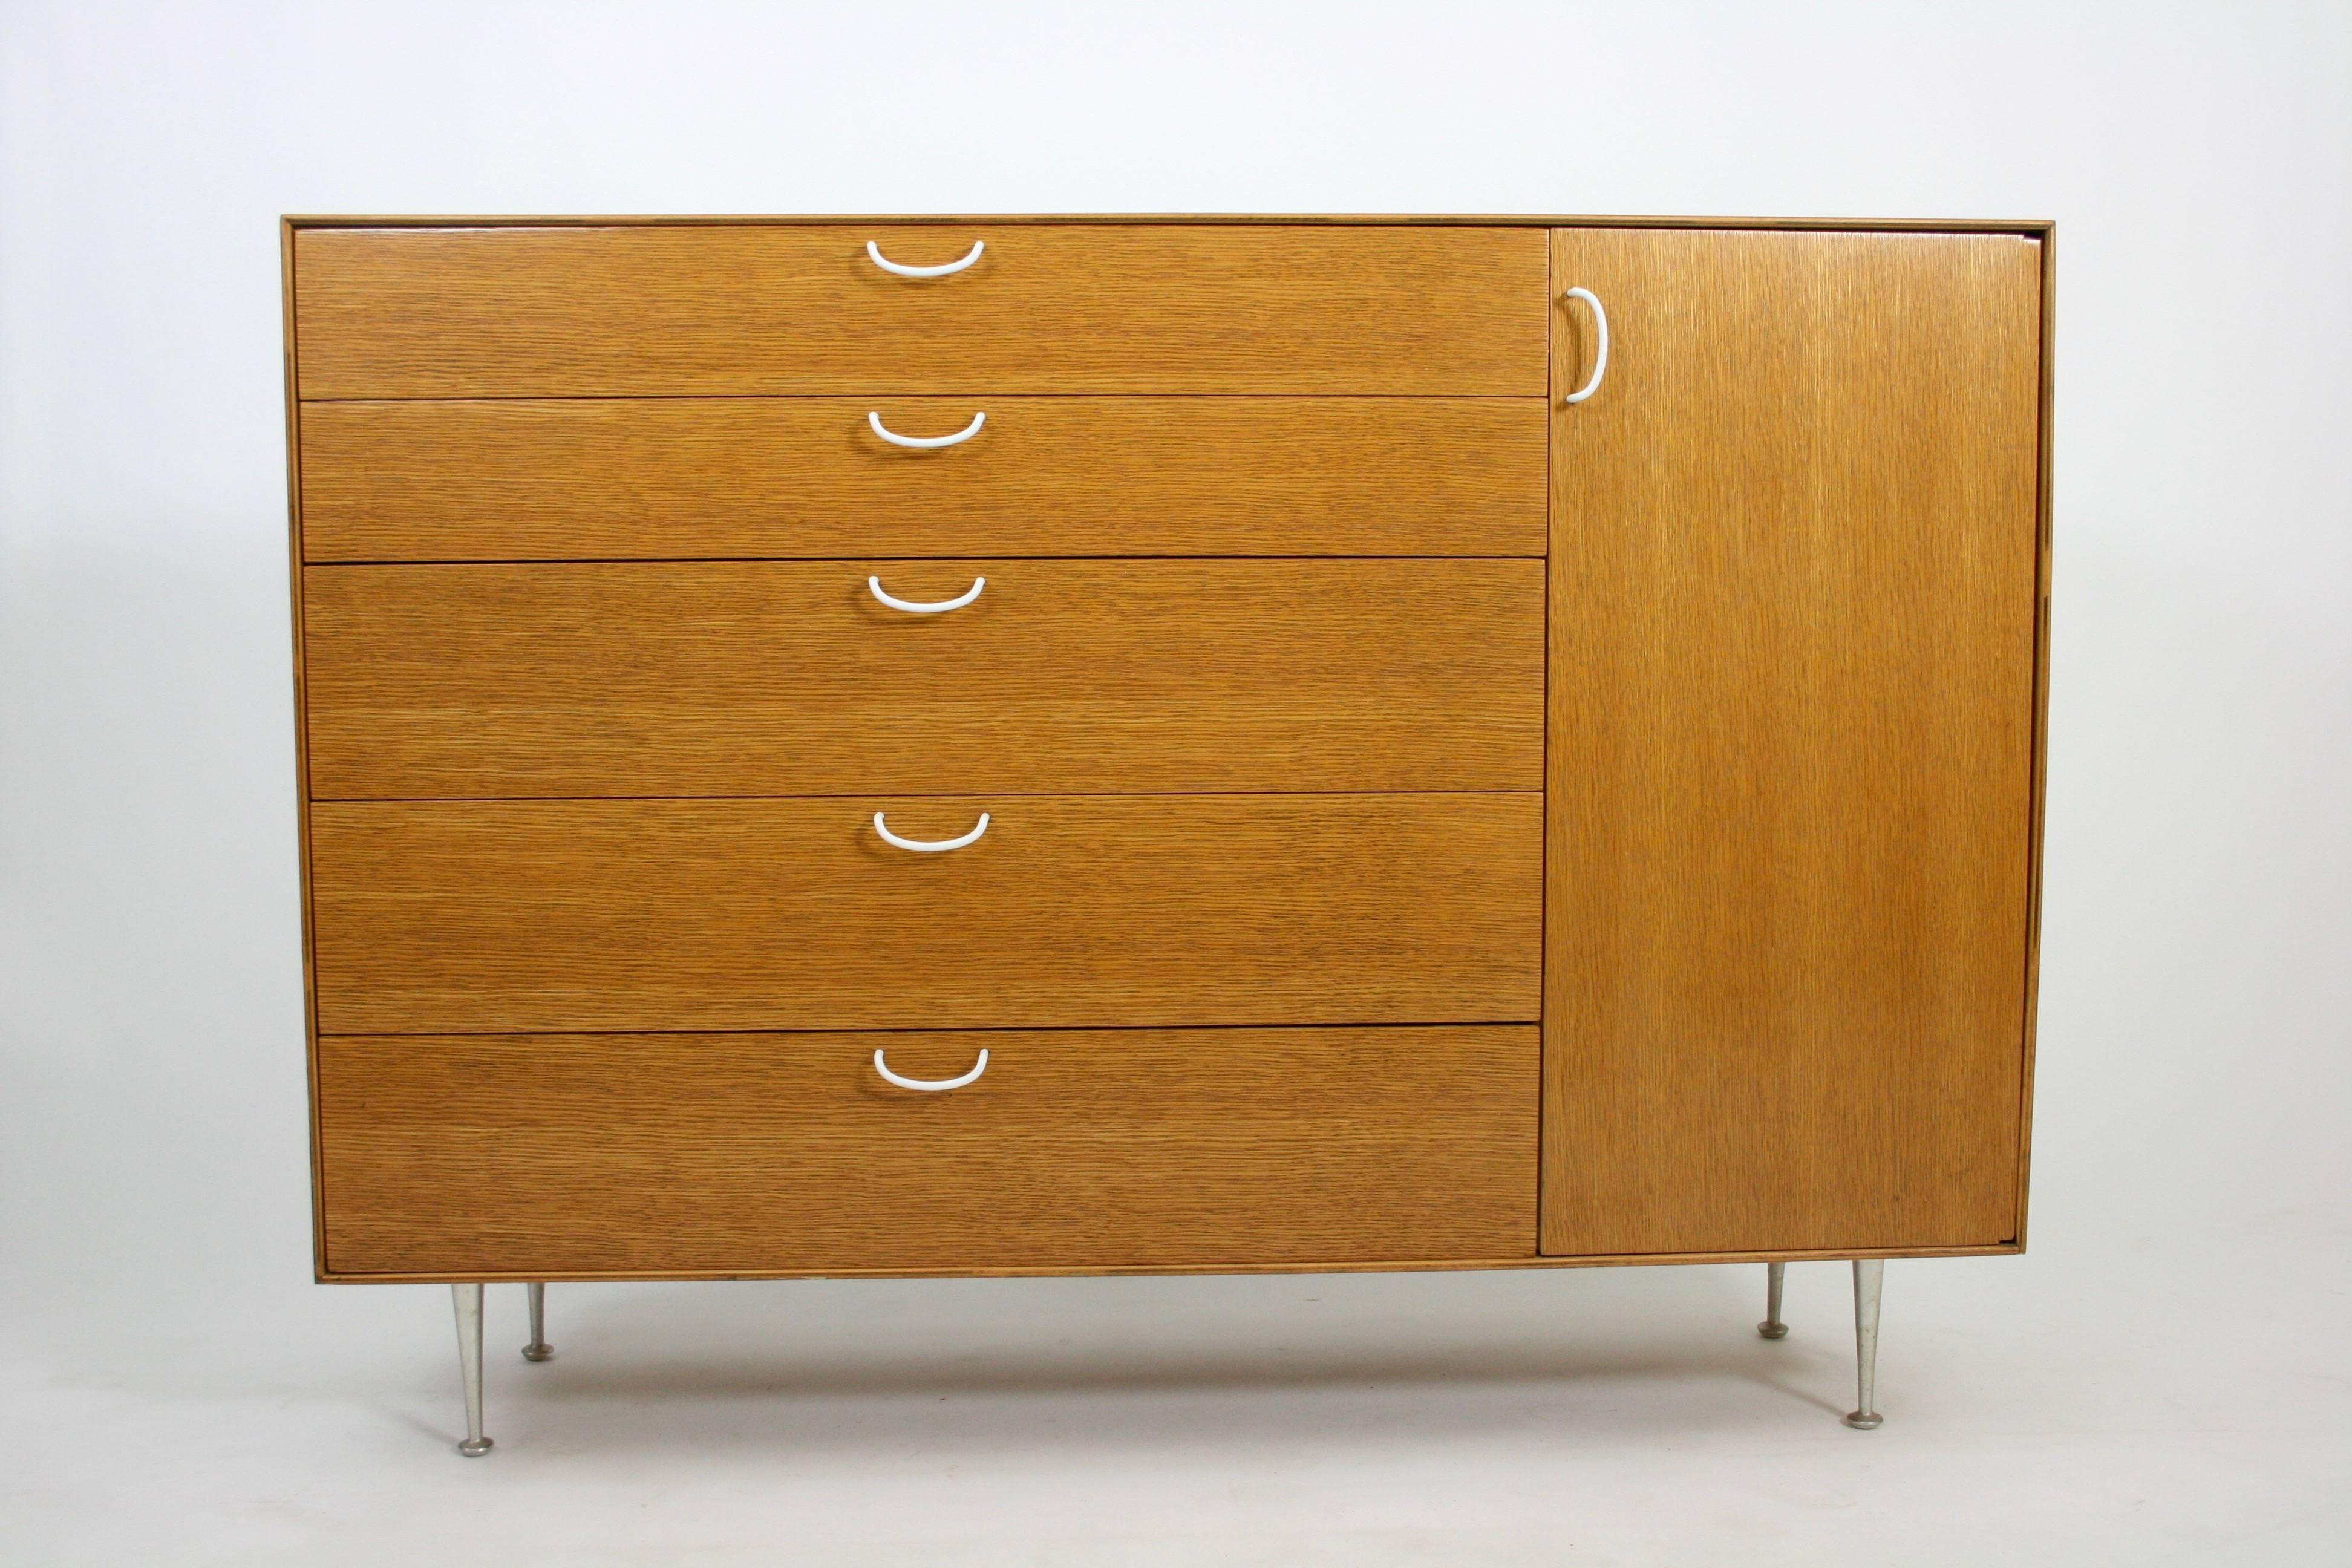 Rare 1952 Combed Oak Thin Edge George Nelson Cabinet for Herman Miller 3